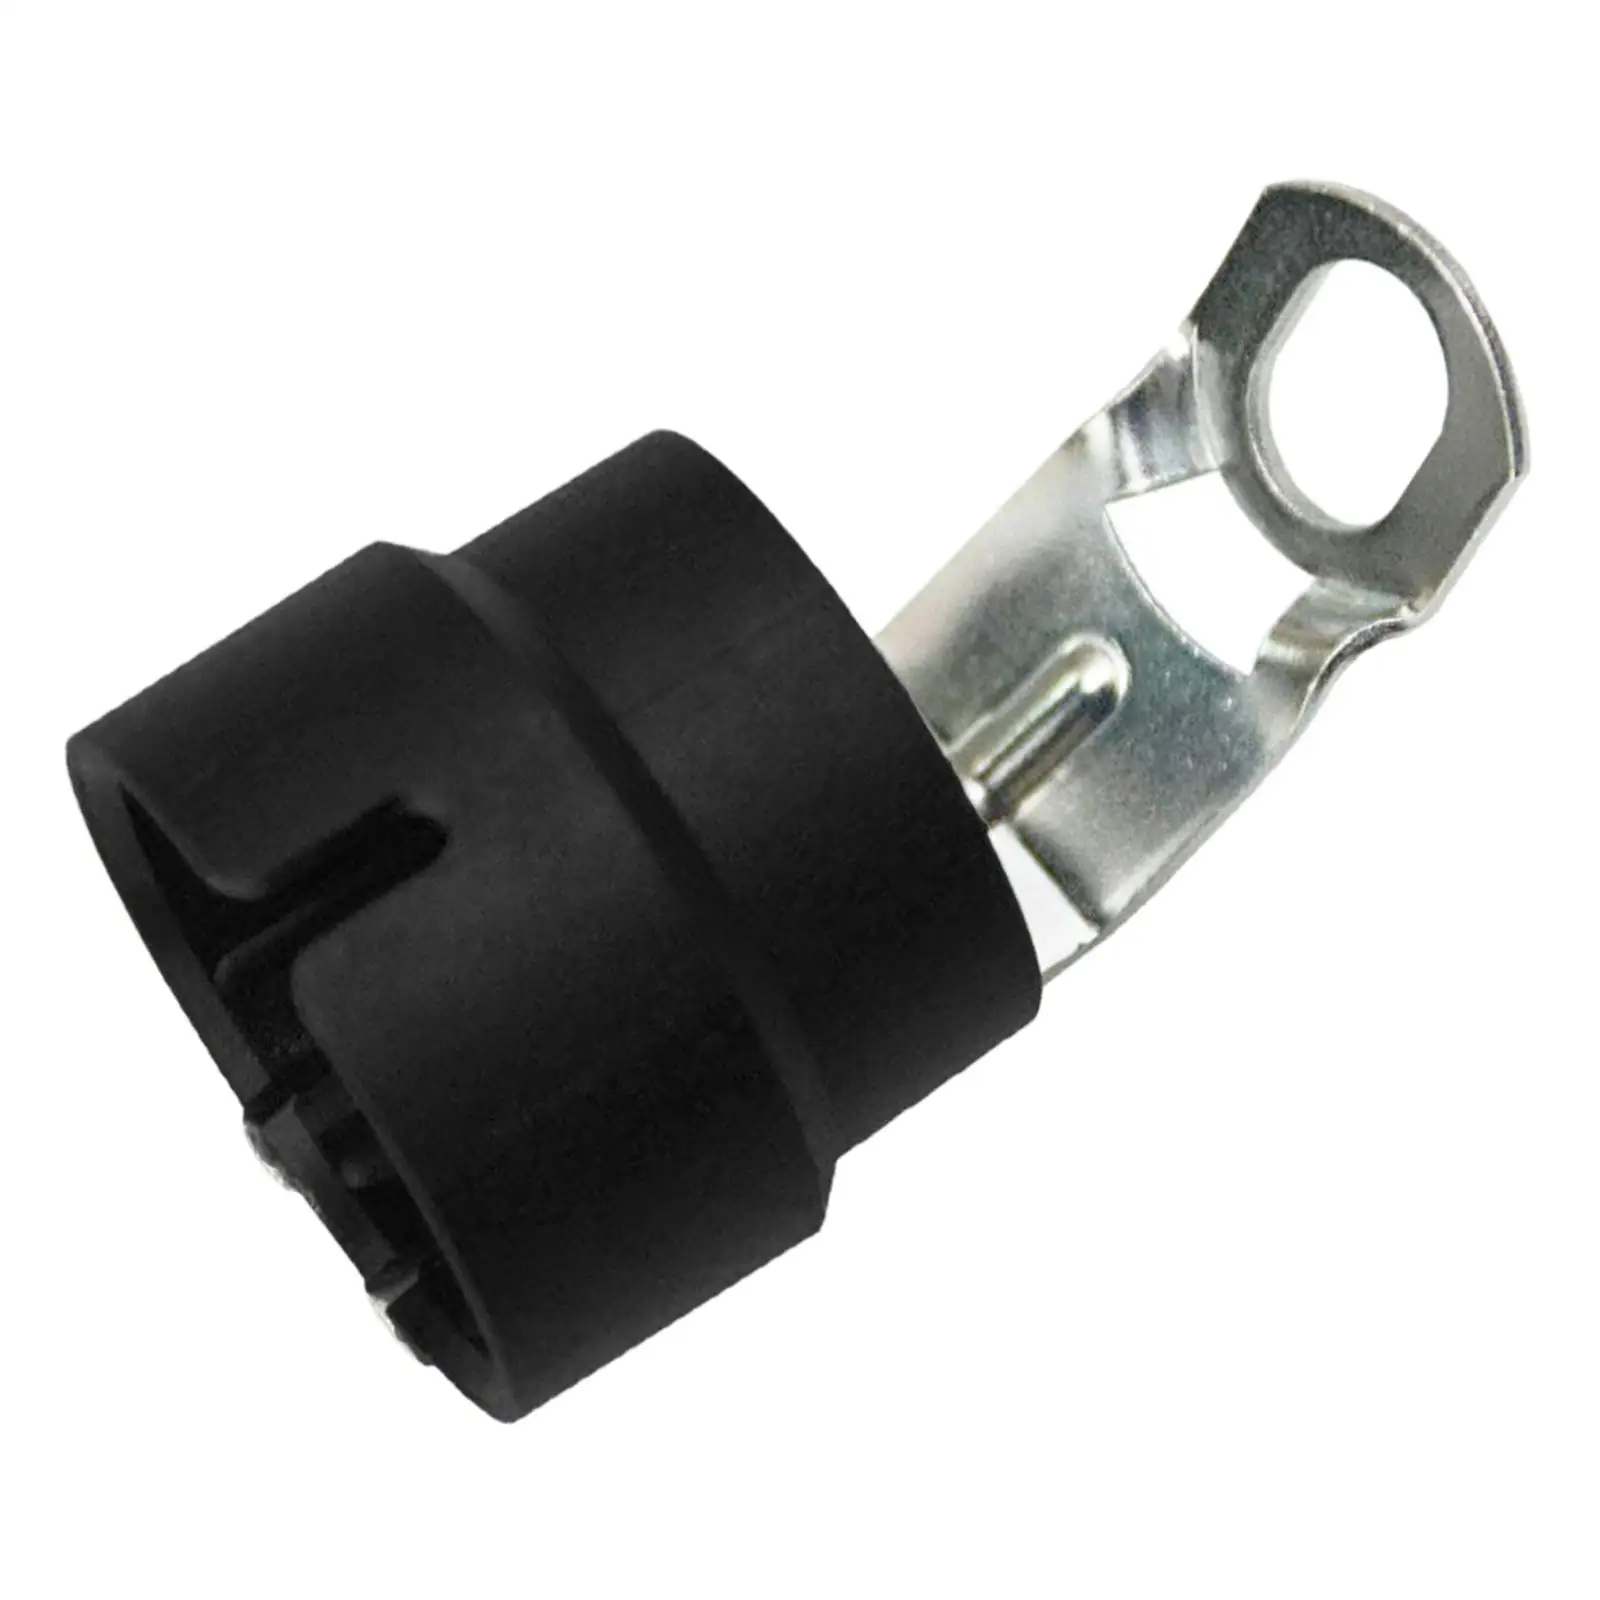 Plug Holder Easy to Install Adapter Holder Durable